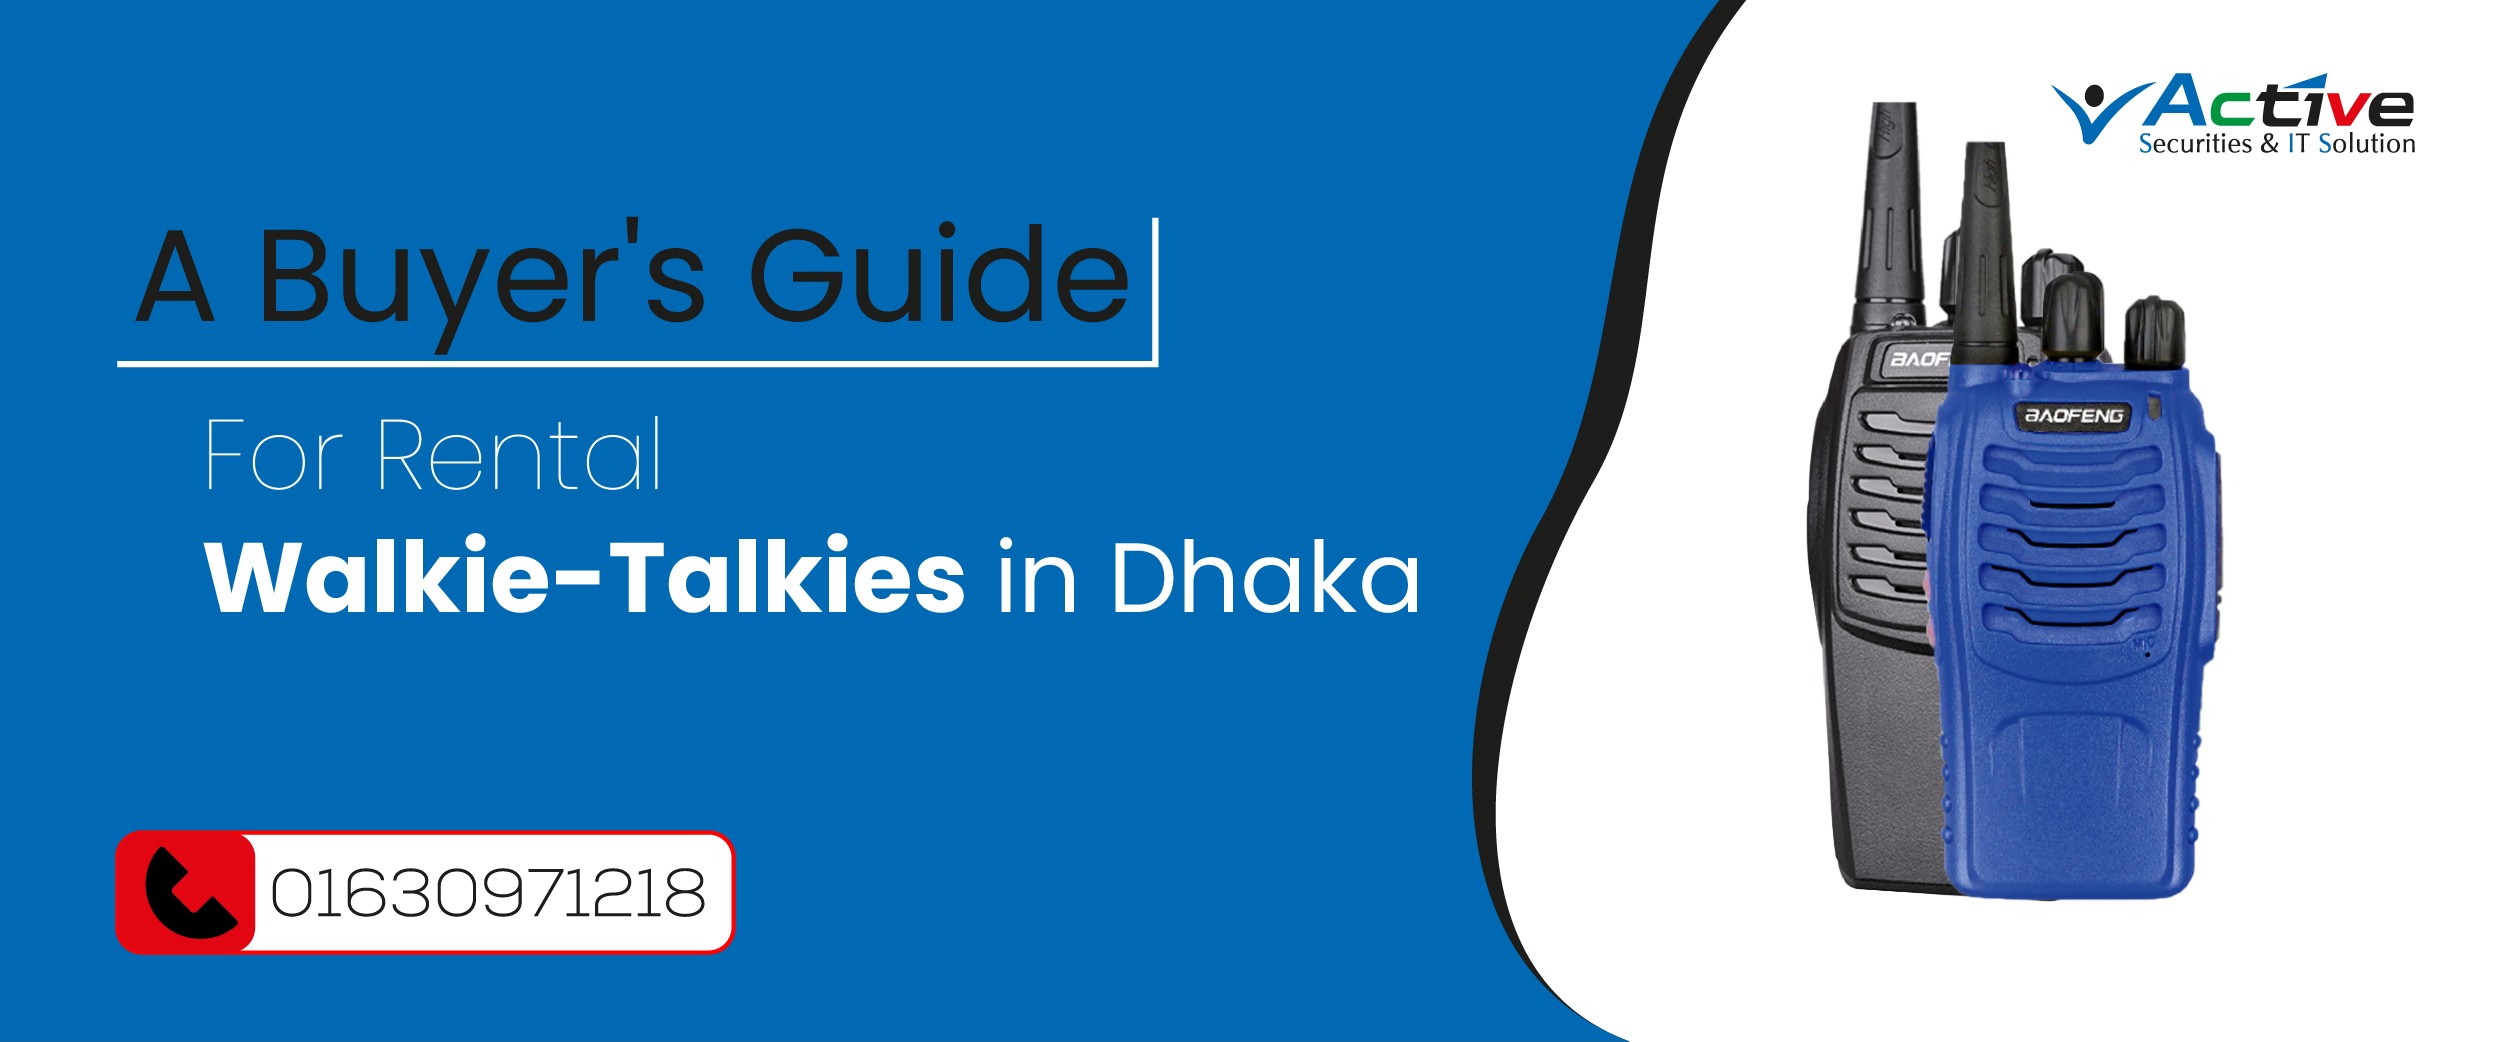 A Buyer's Guide for Rental Walkie-Talkies in Dhaka | Authorized Supplier